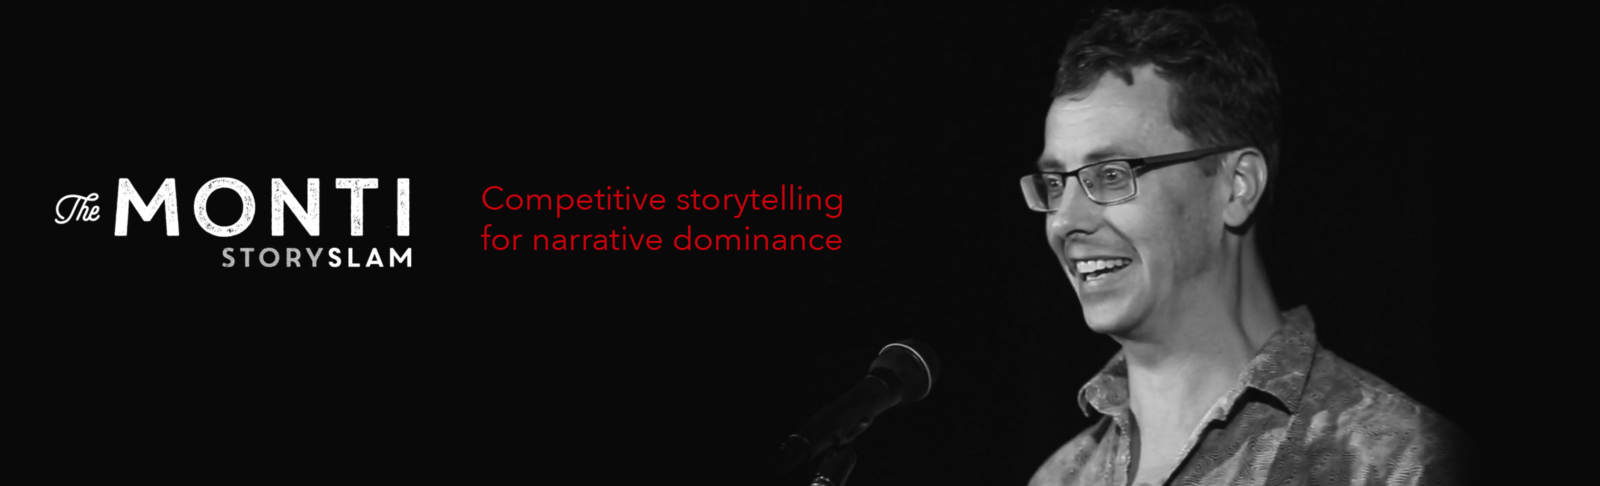 Competitive storytelling for narrative dominance